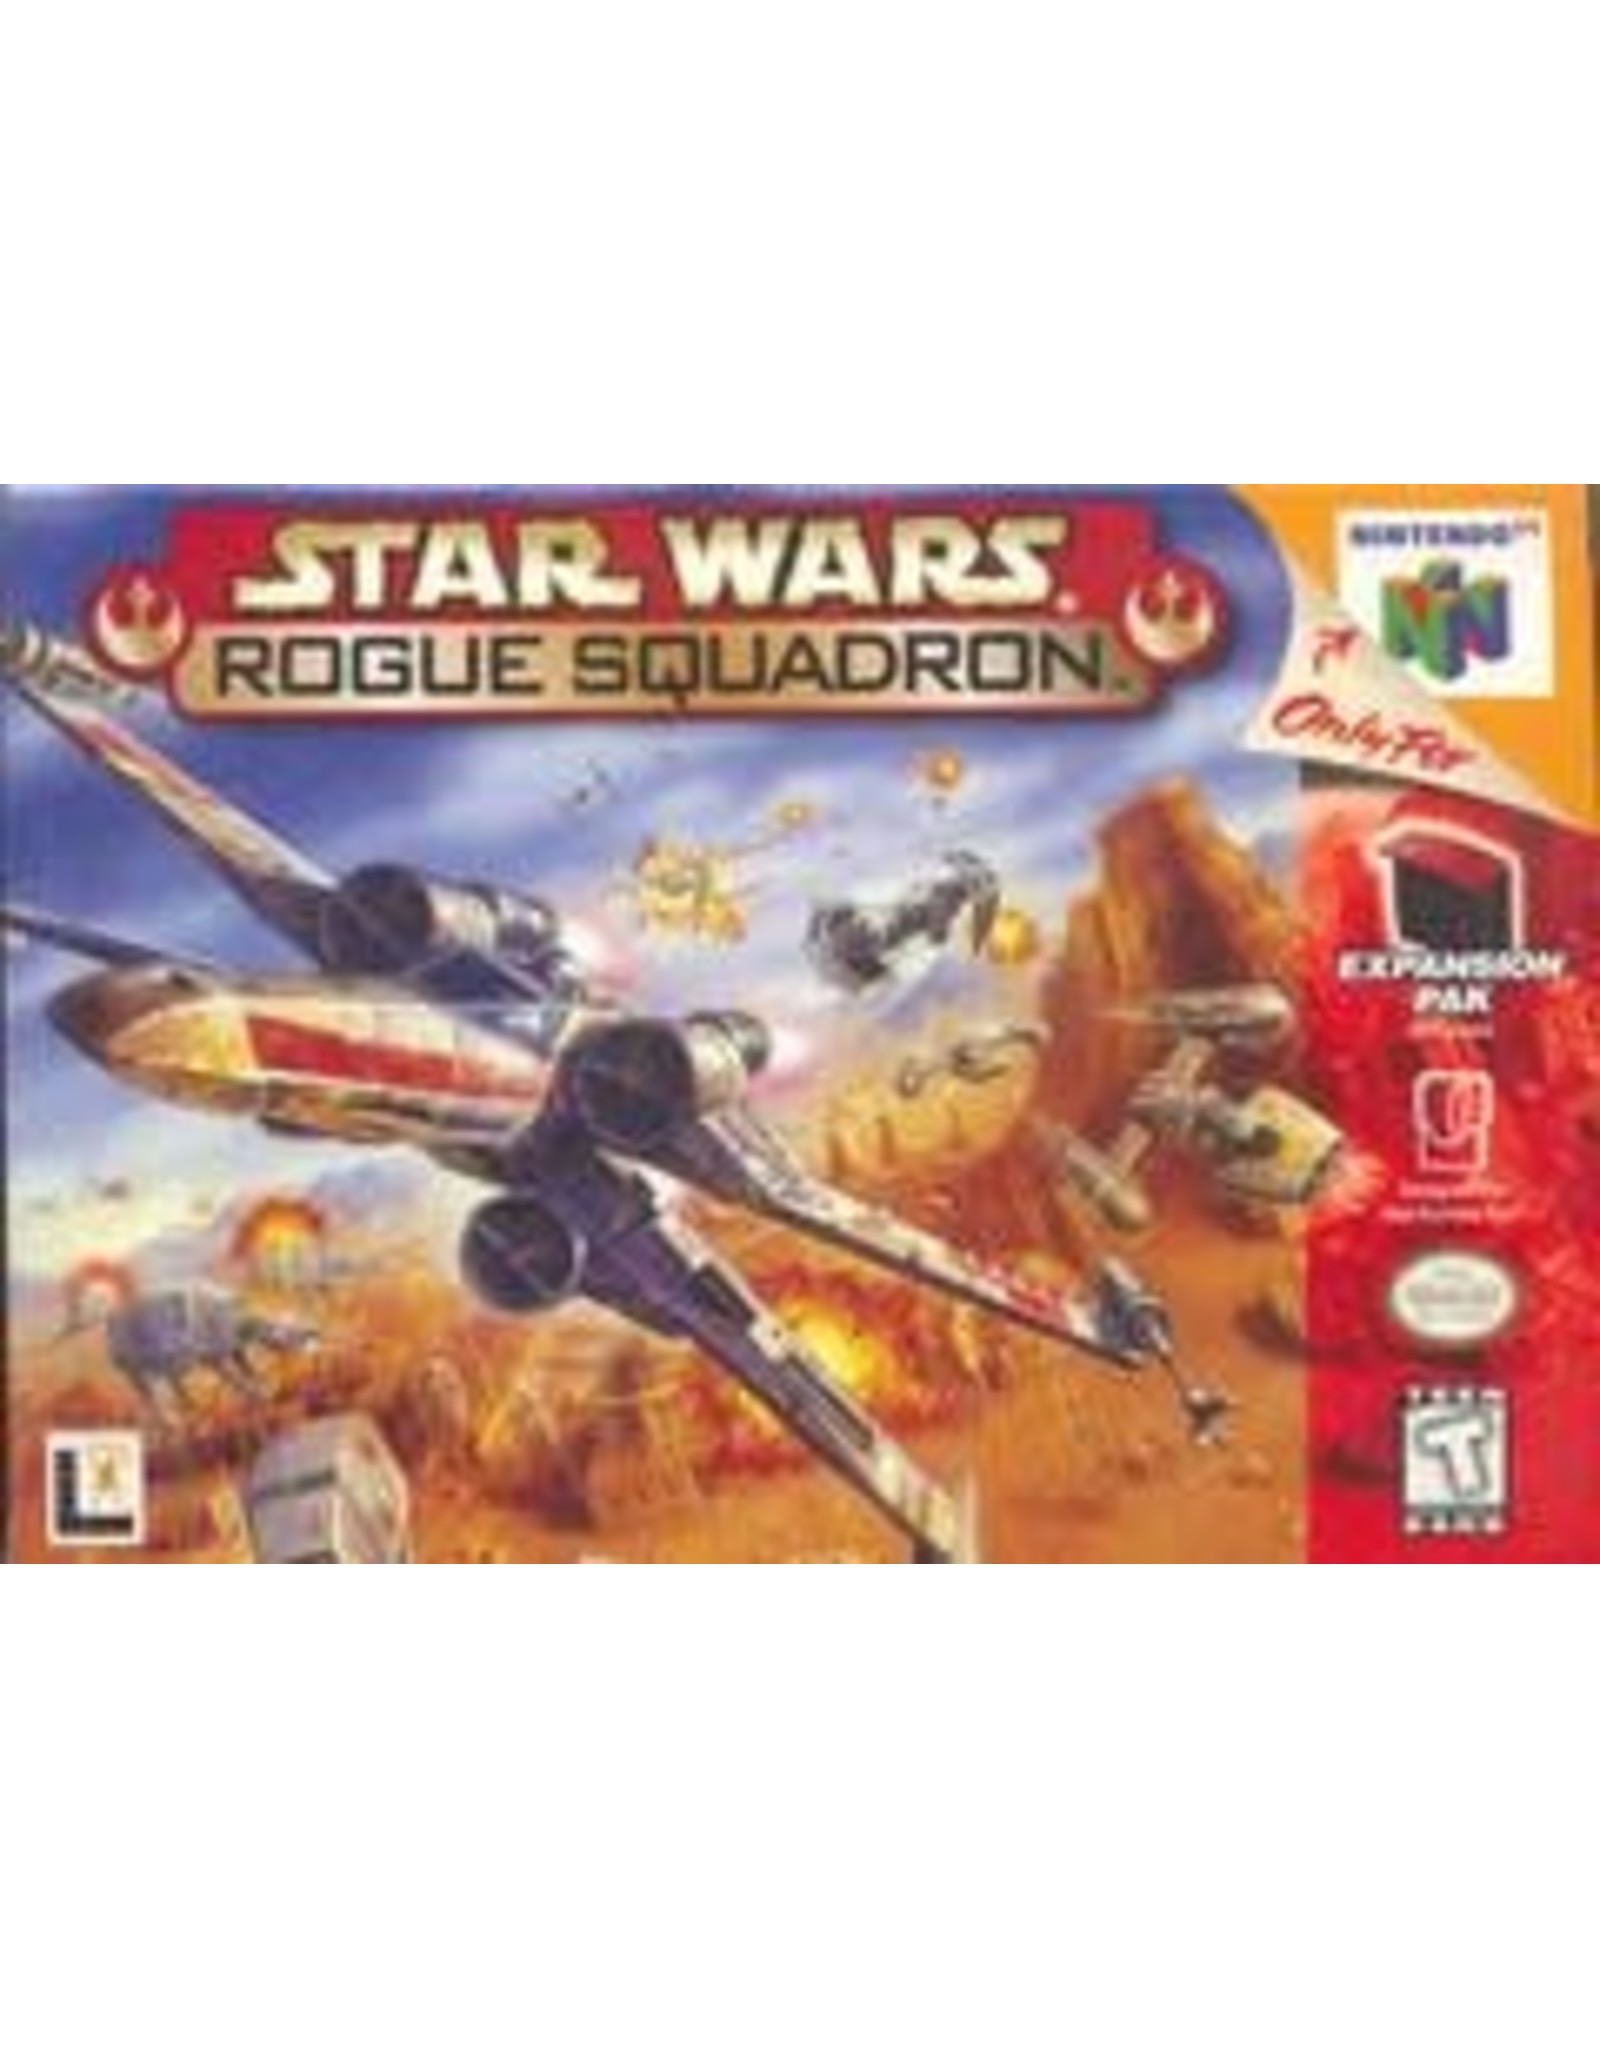 Nintendo 64 Star Wars Rogue Squadron (Used, Cart Only)